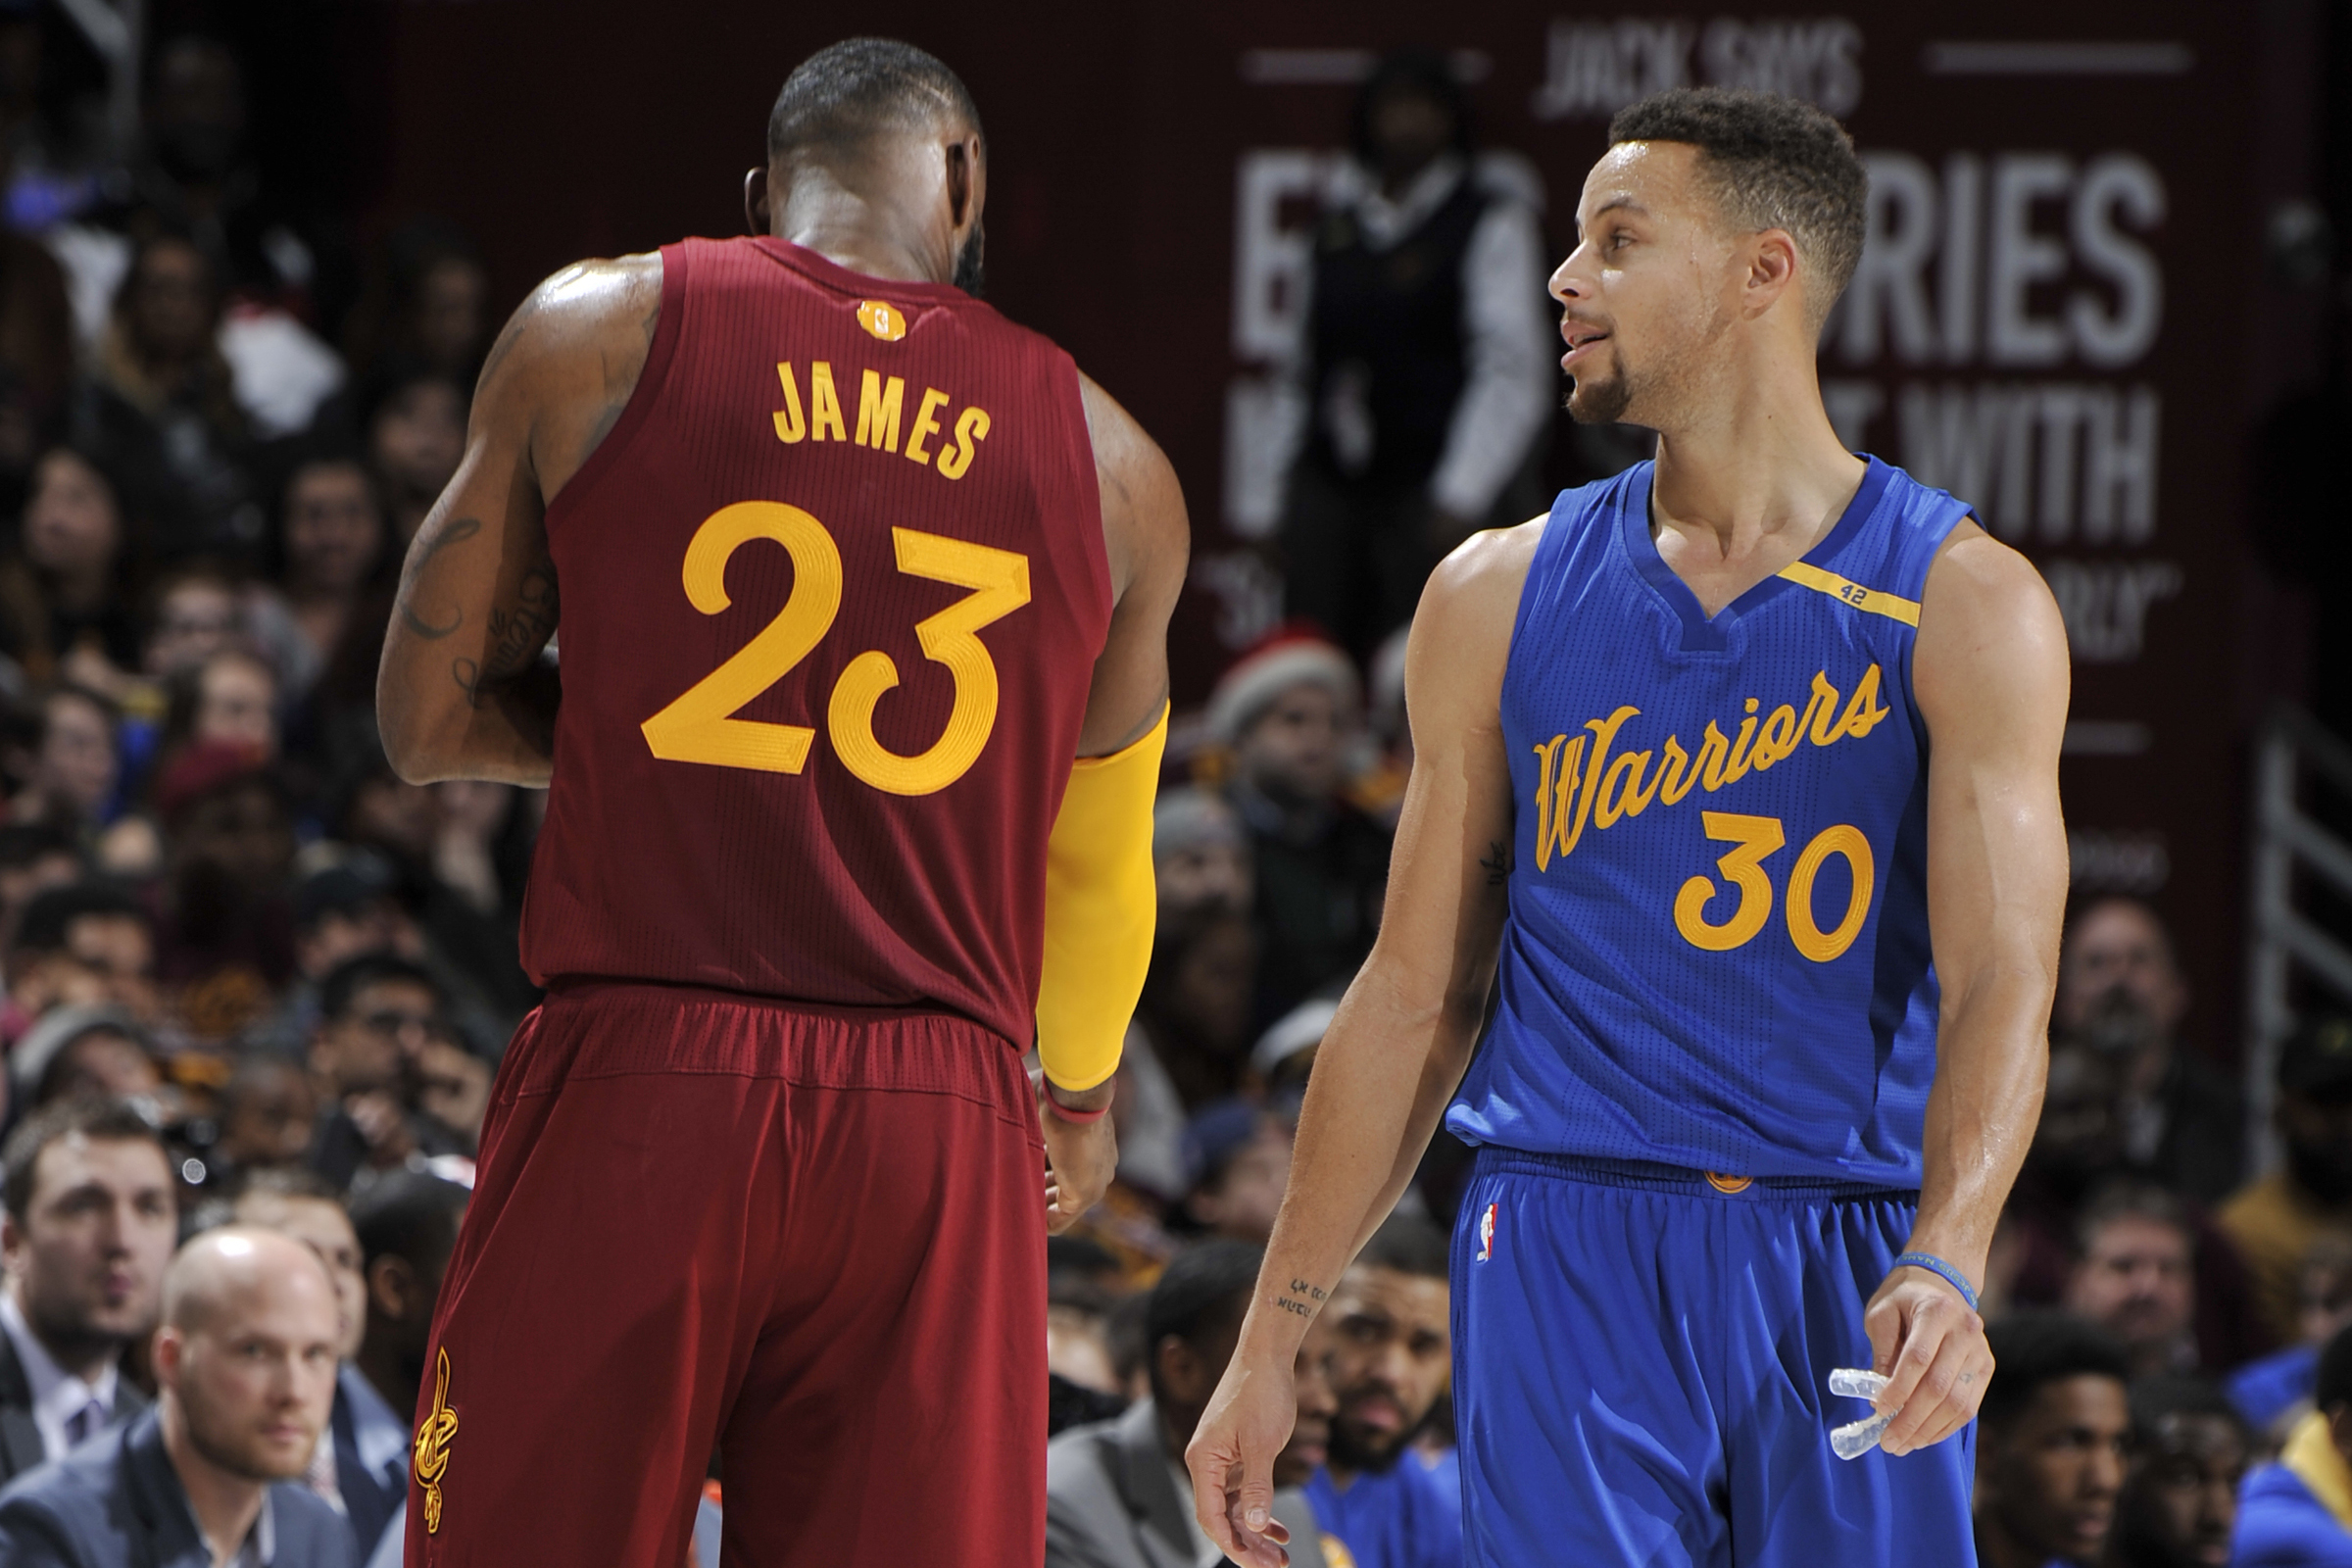 LeBron James, Stephen Curry Lead NBA's Top-Selling Jersey List for